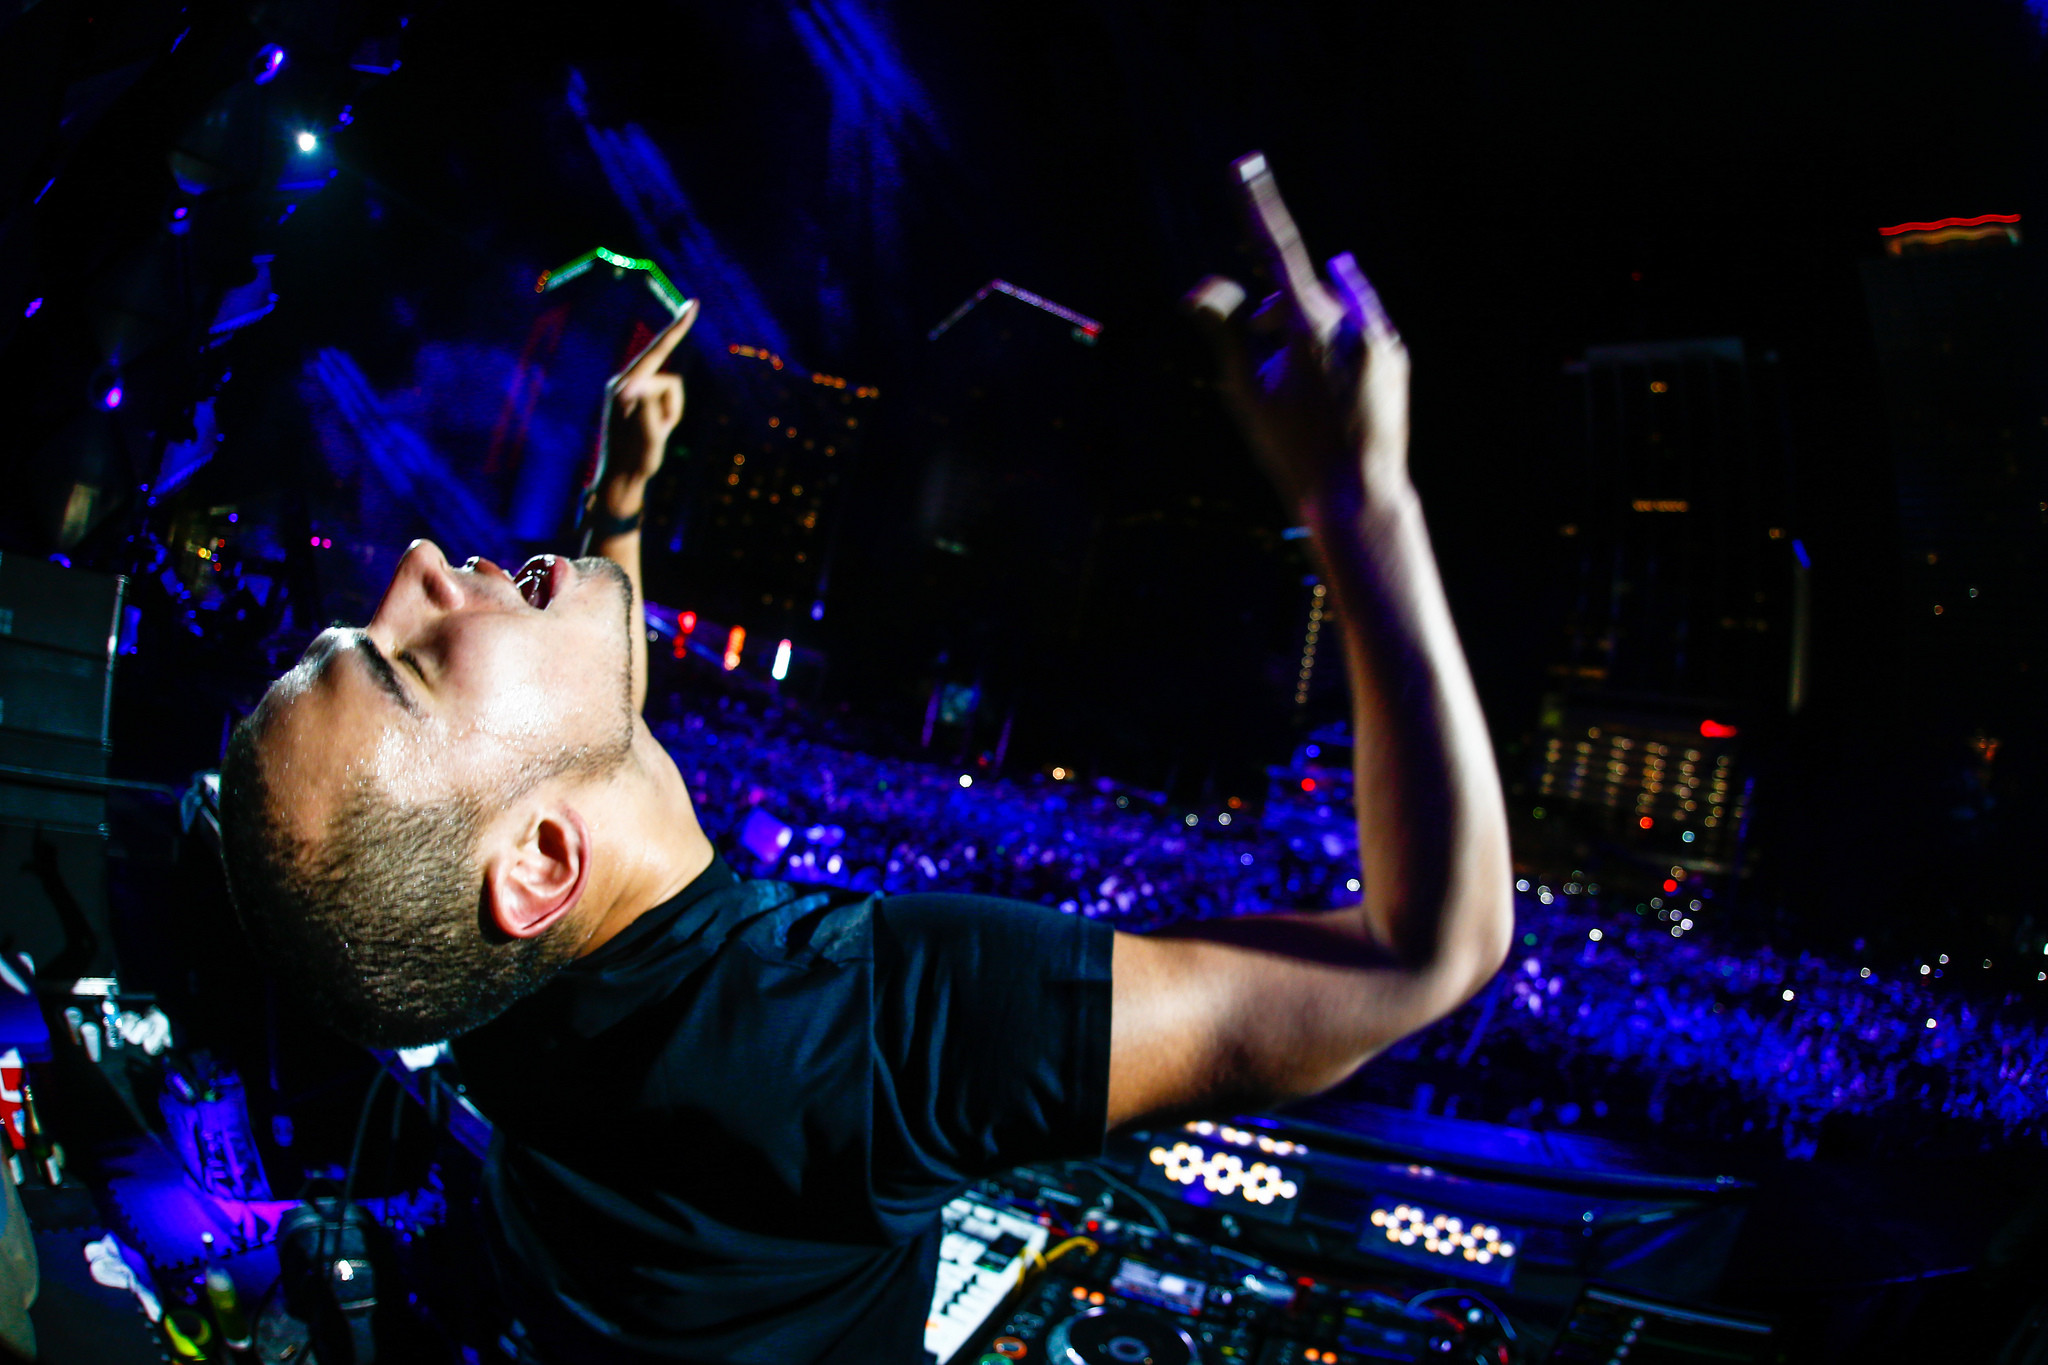 Ultra-Music-Festival-Miami-MMW-WMC-UltraFest-HD-Wallpapers -Pics-Photos-Afrojack-in-the-middle-of-the-hardest-frop-ever